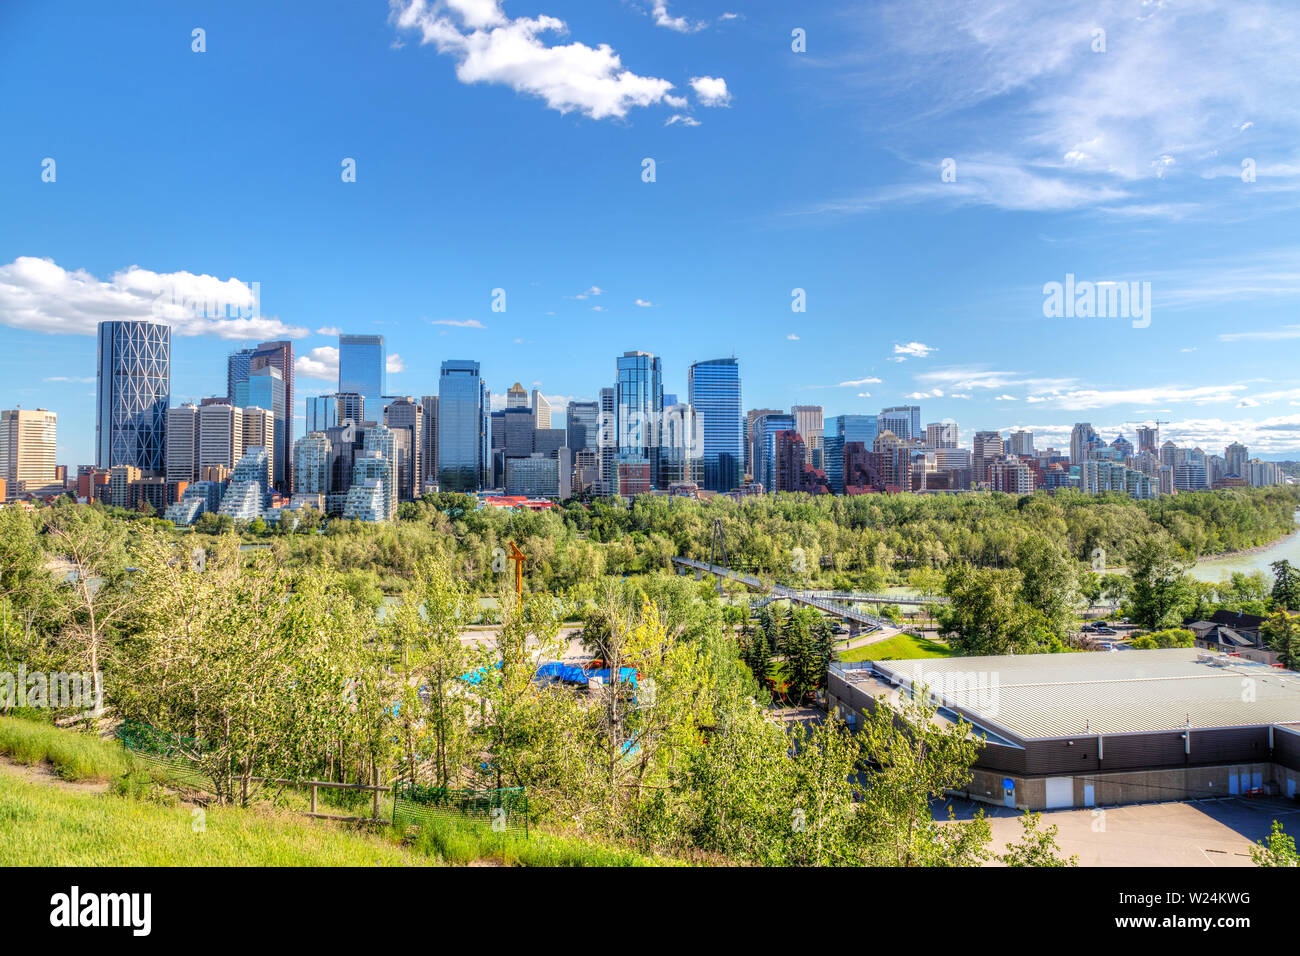 Wide angle view of Calgary downtown urban skyline in Summer with Bow River surrounding the financial district and its skyscrapers. Stock Photo